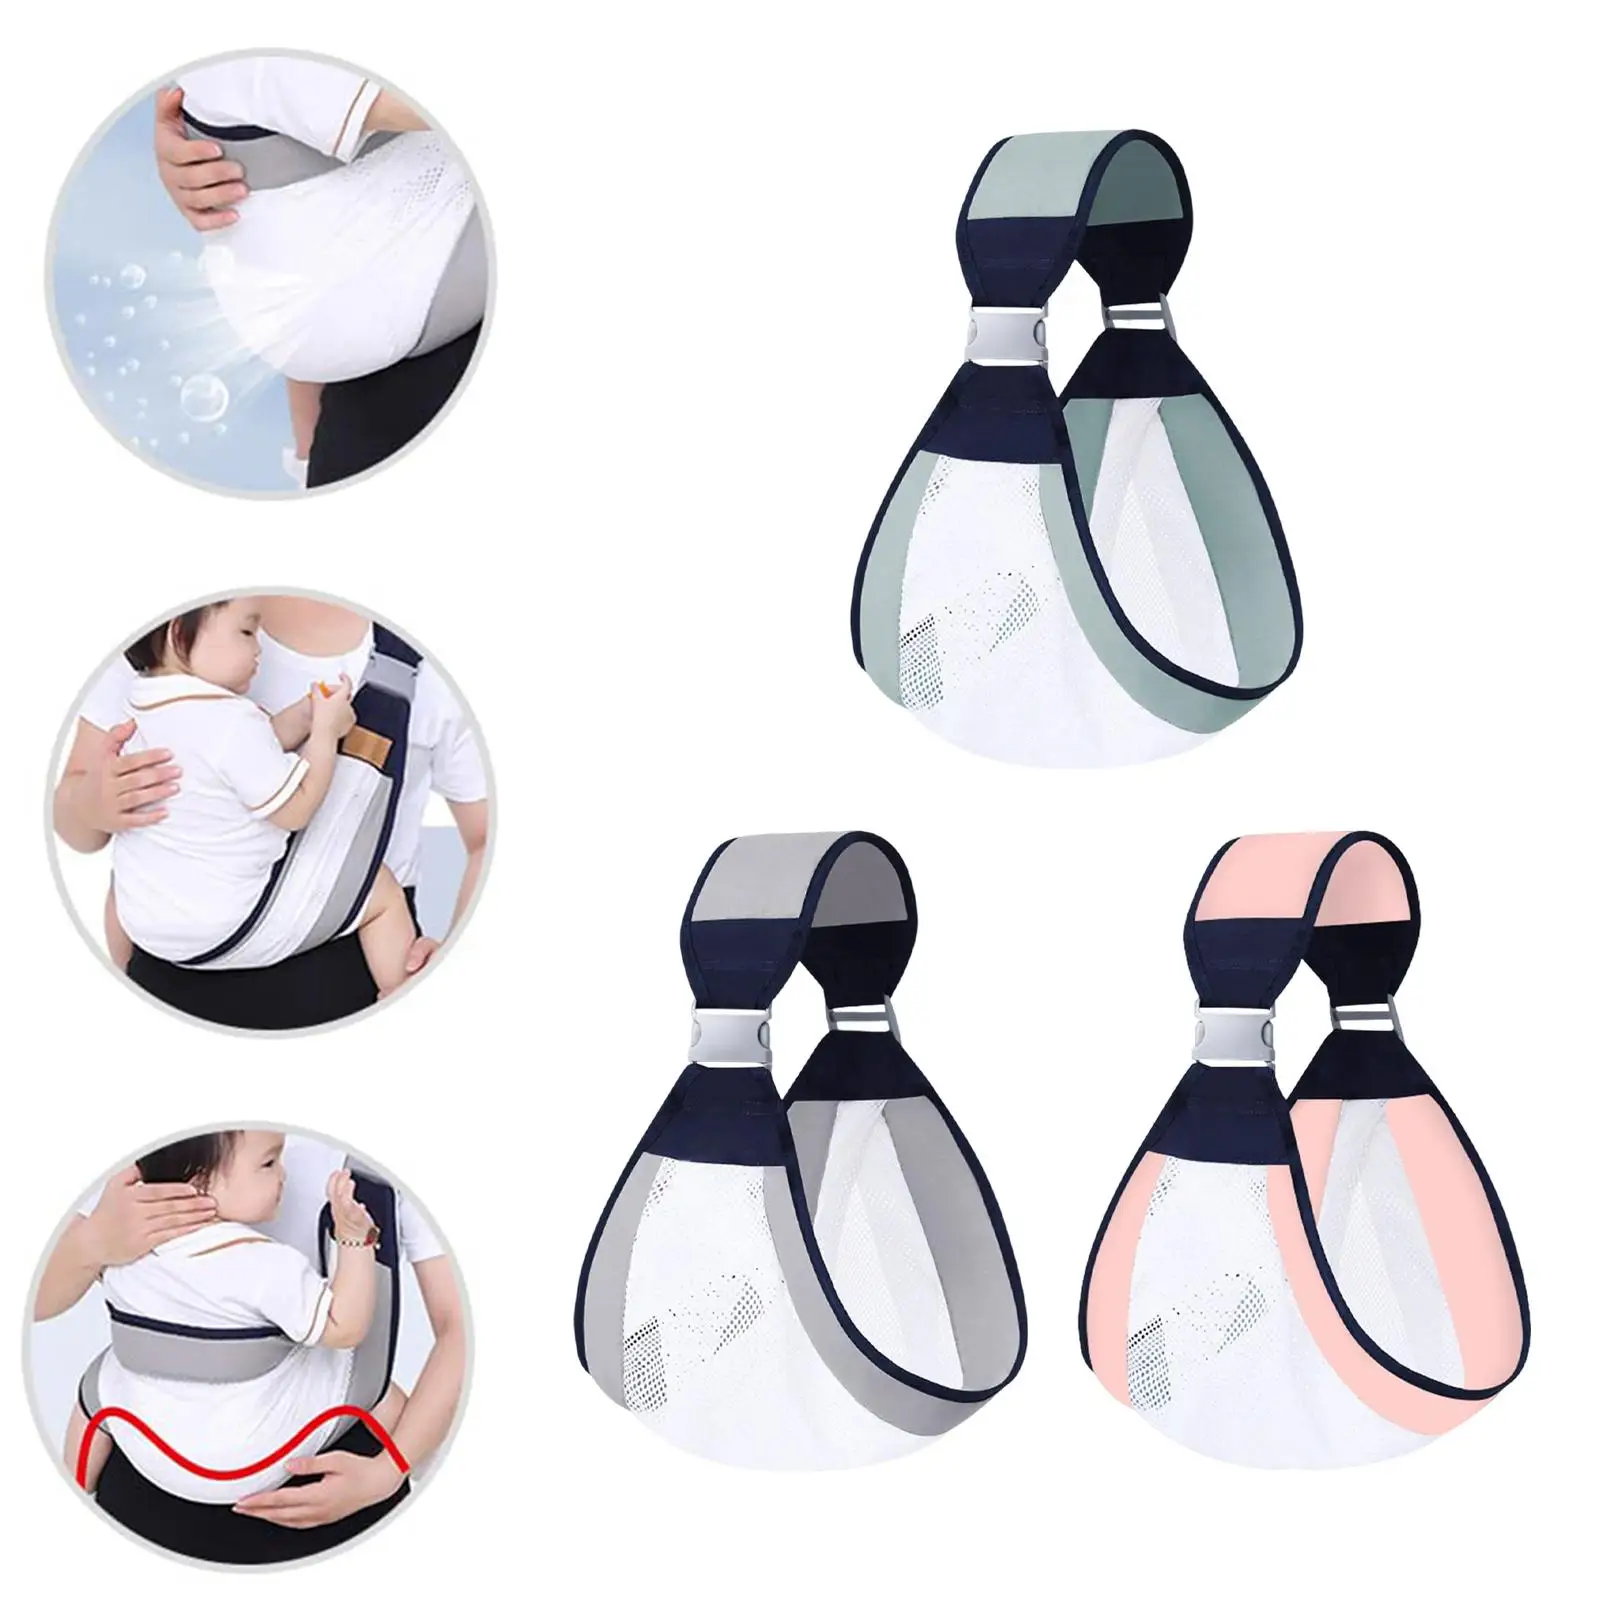 Baby Carrier Adjustable Infant Breastfeeding Nursing Carriers with Clip Baby Holder Straps for Newborn Toddlers up to 20kg